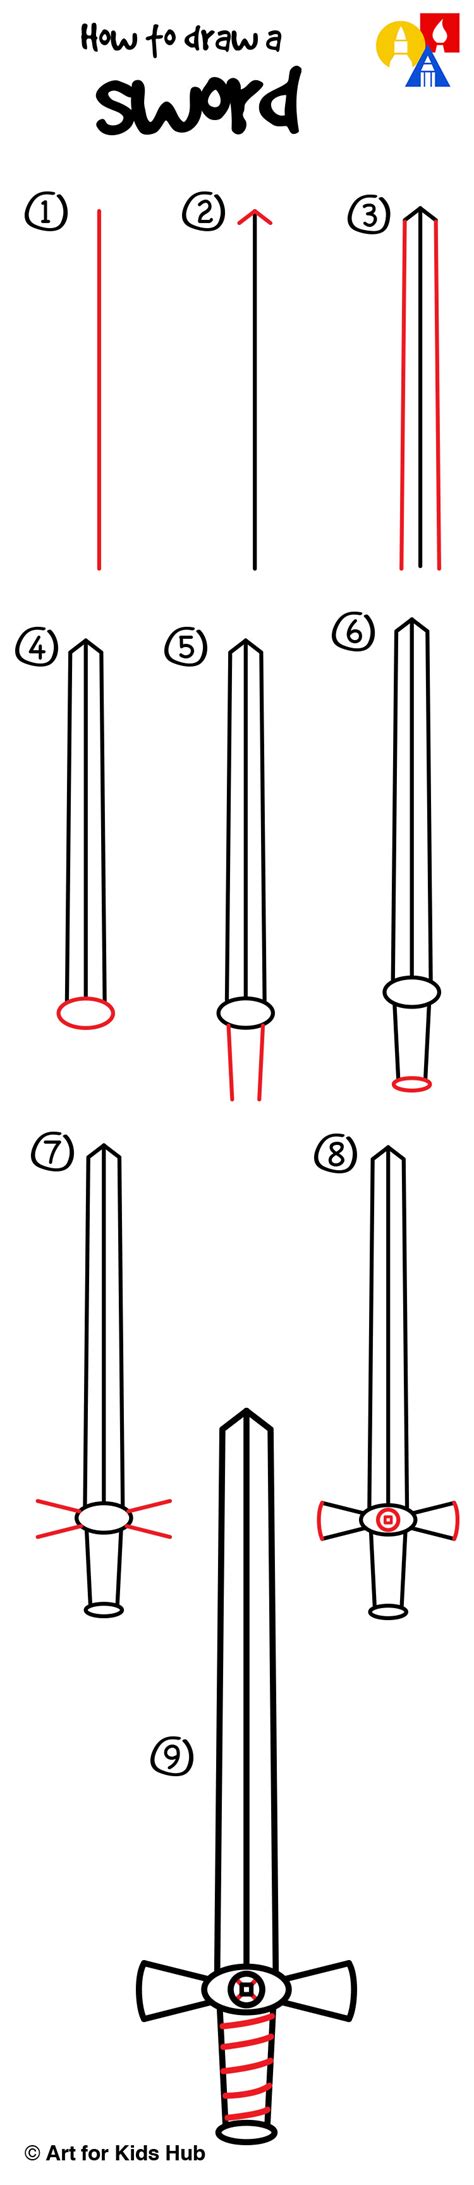 How To Draw A Sword Step By Step